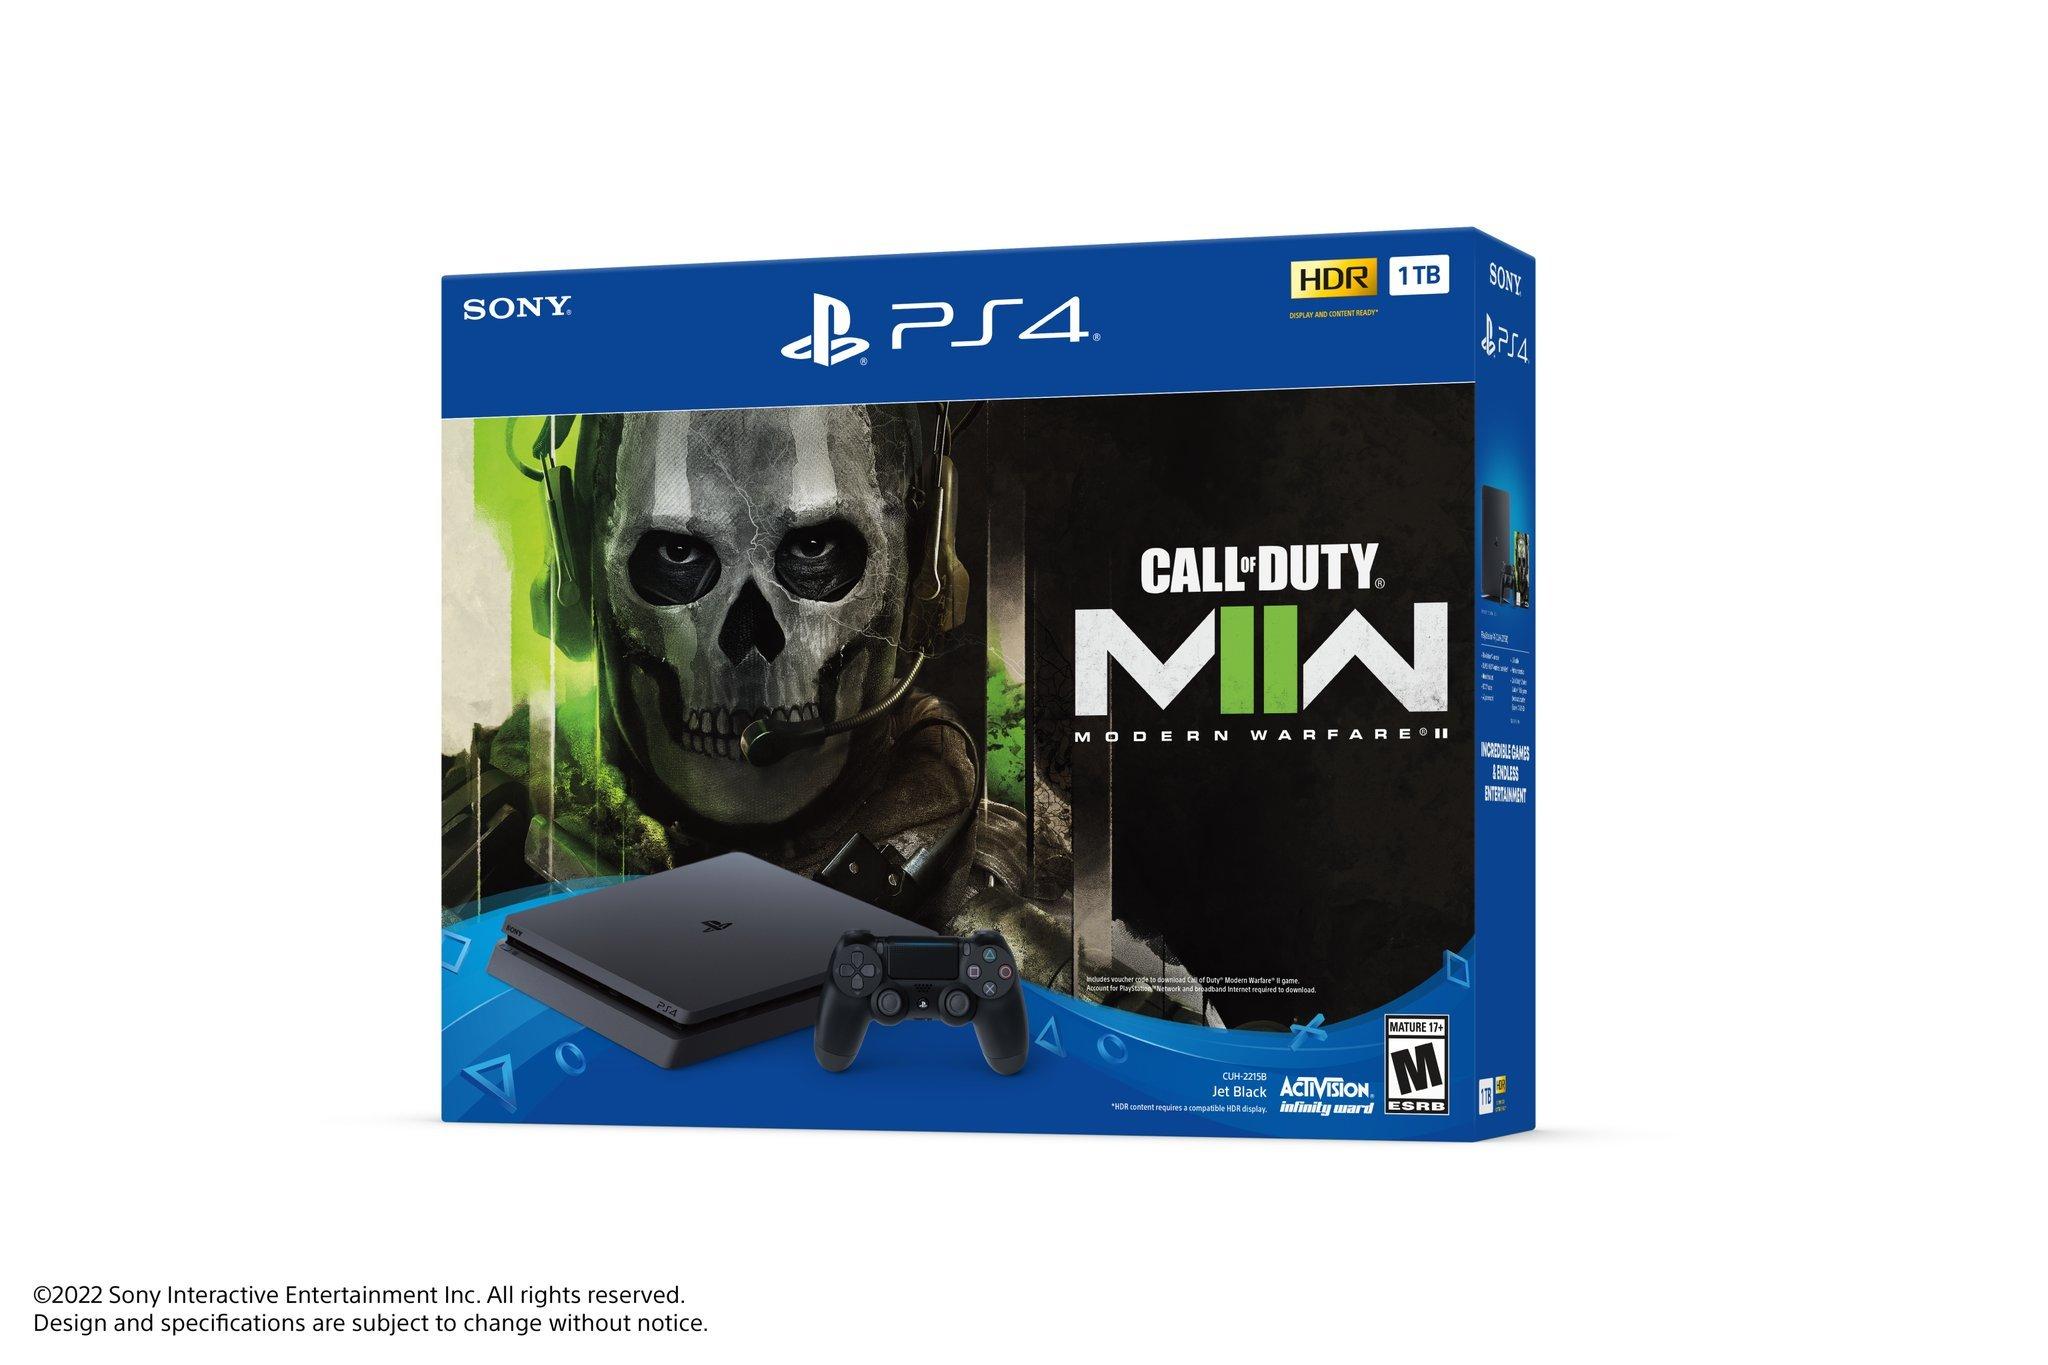 PS4 500GB Console with Call of Duty Modern Warfare 2 Voucher and